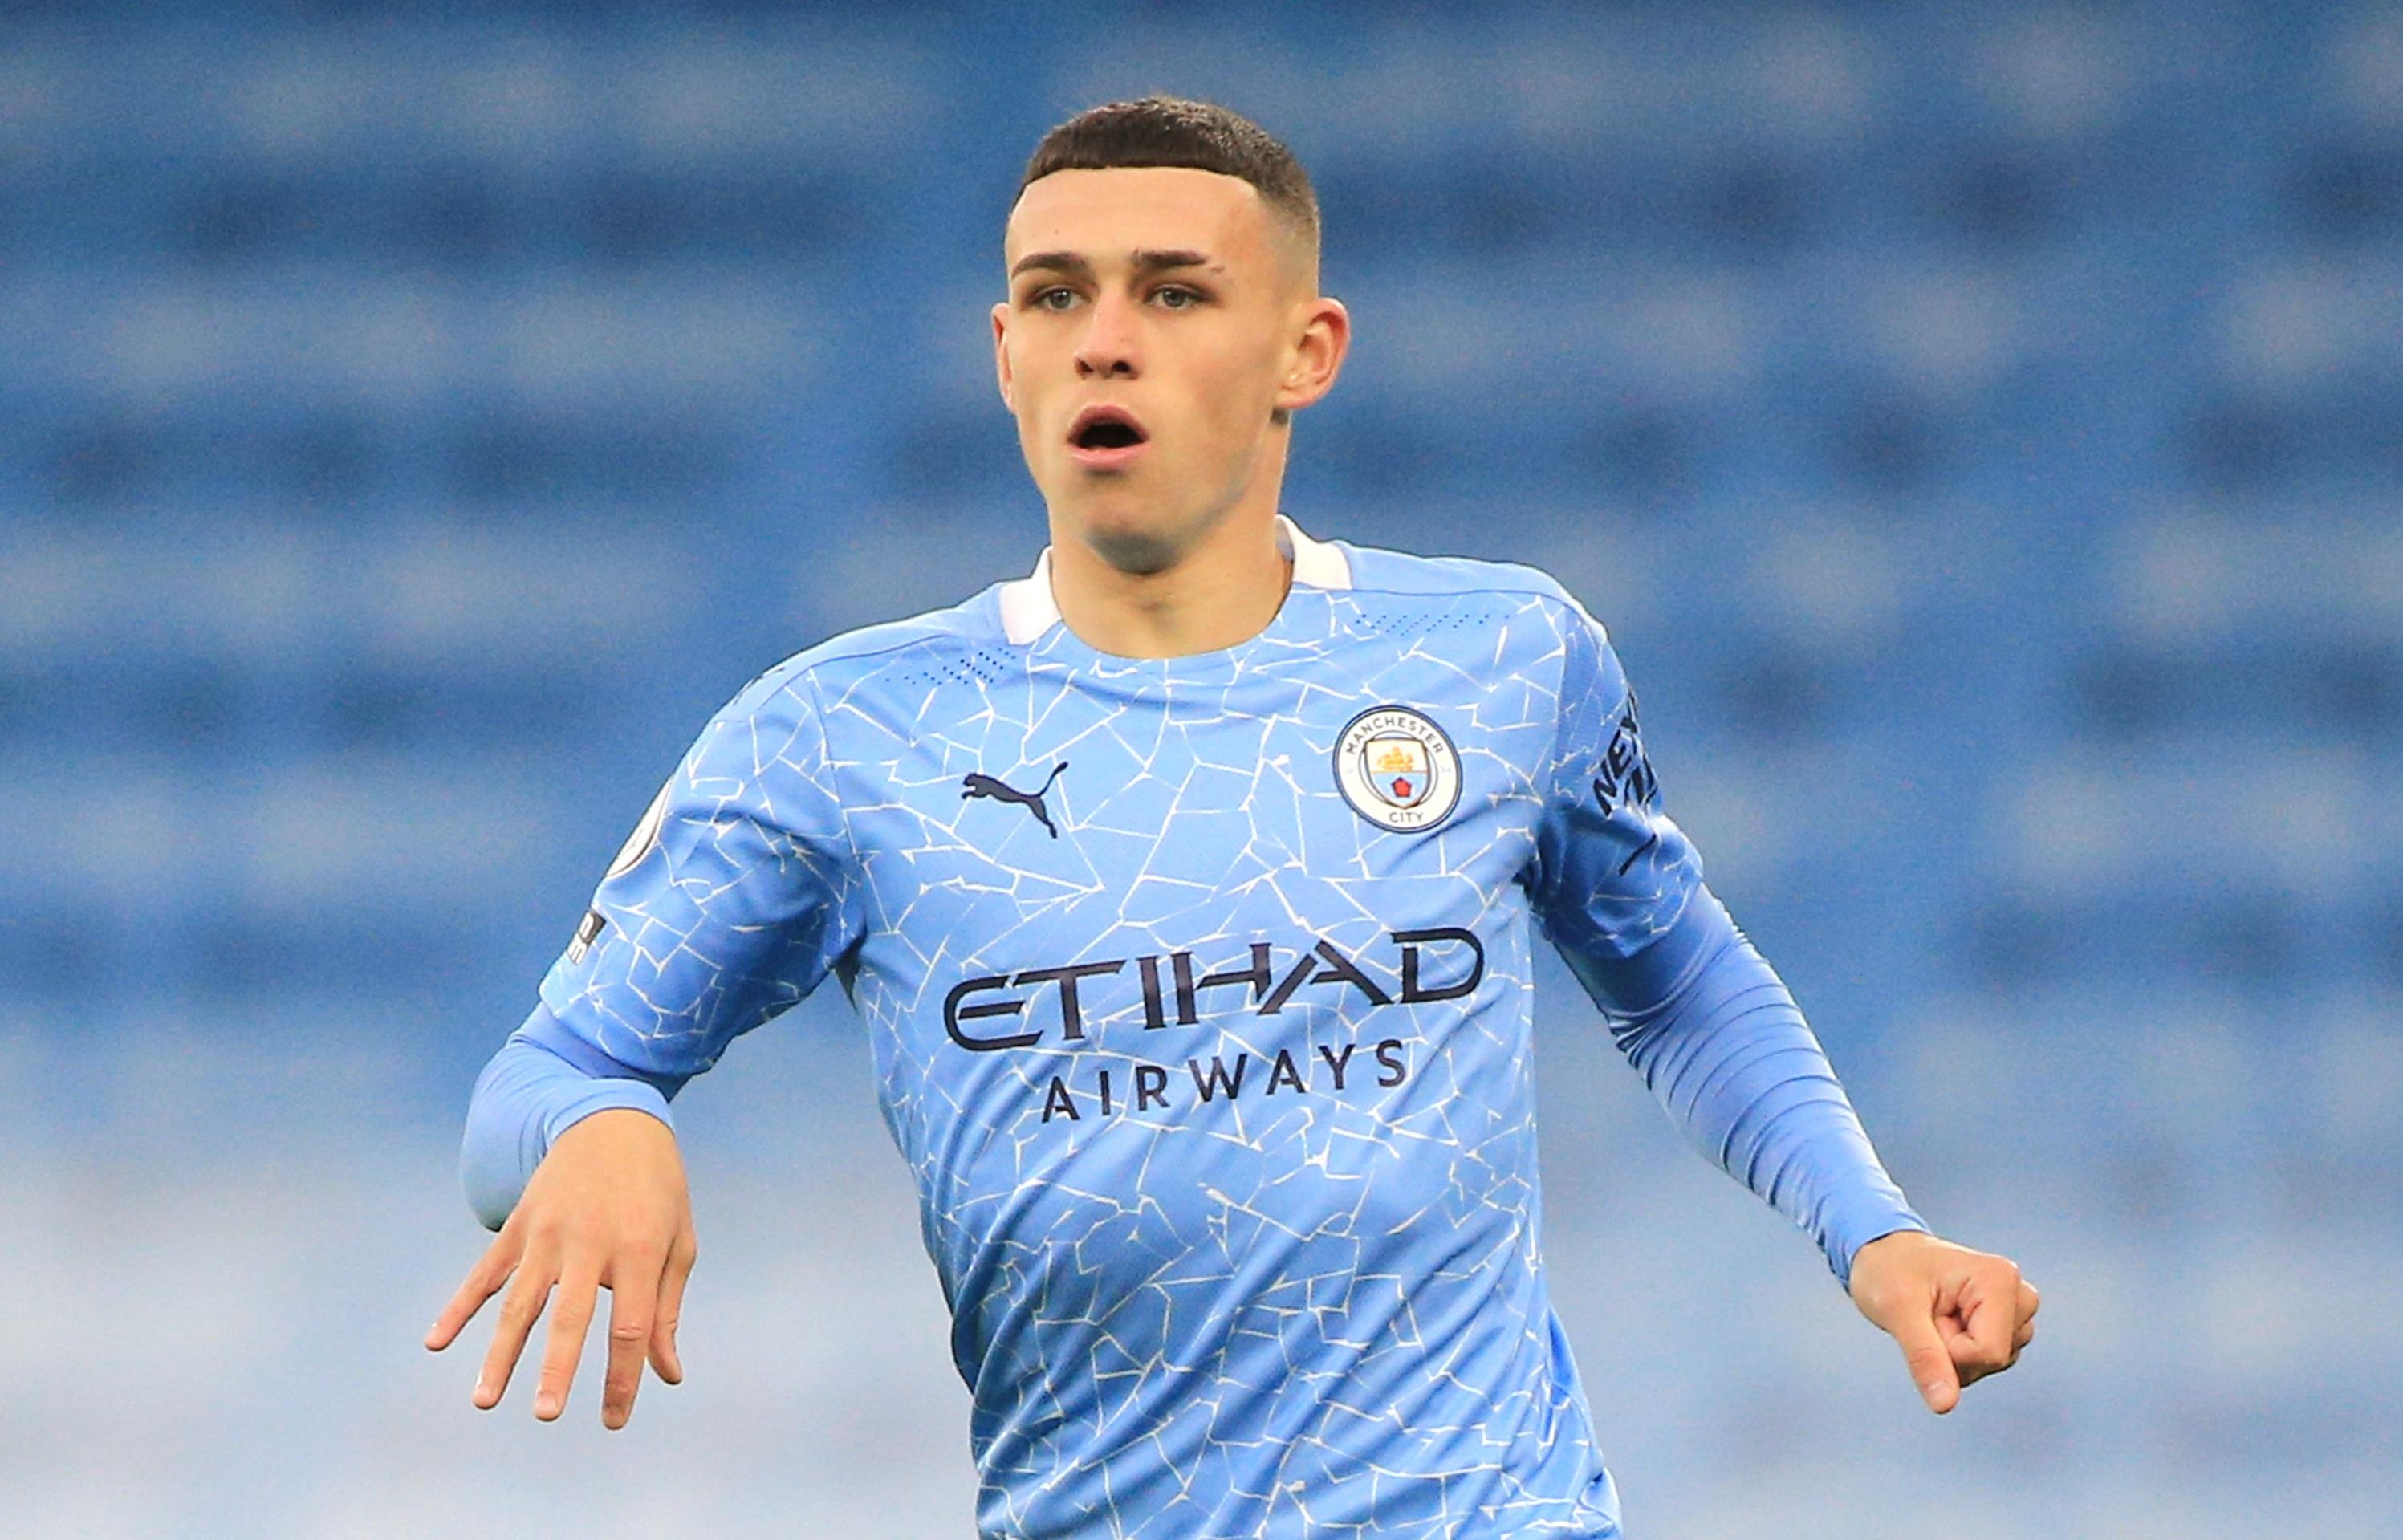 Phil Foden video: Manchester City release statement over 'VIRAL' video showing Phil Foden's mother being attacked - Read Full statement